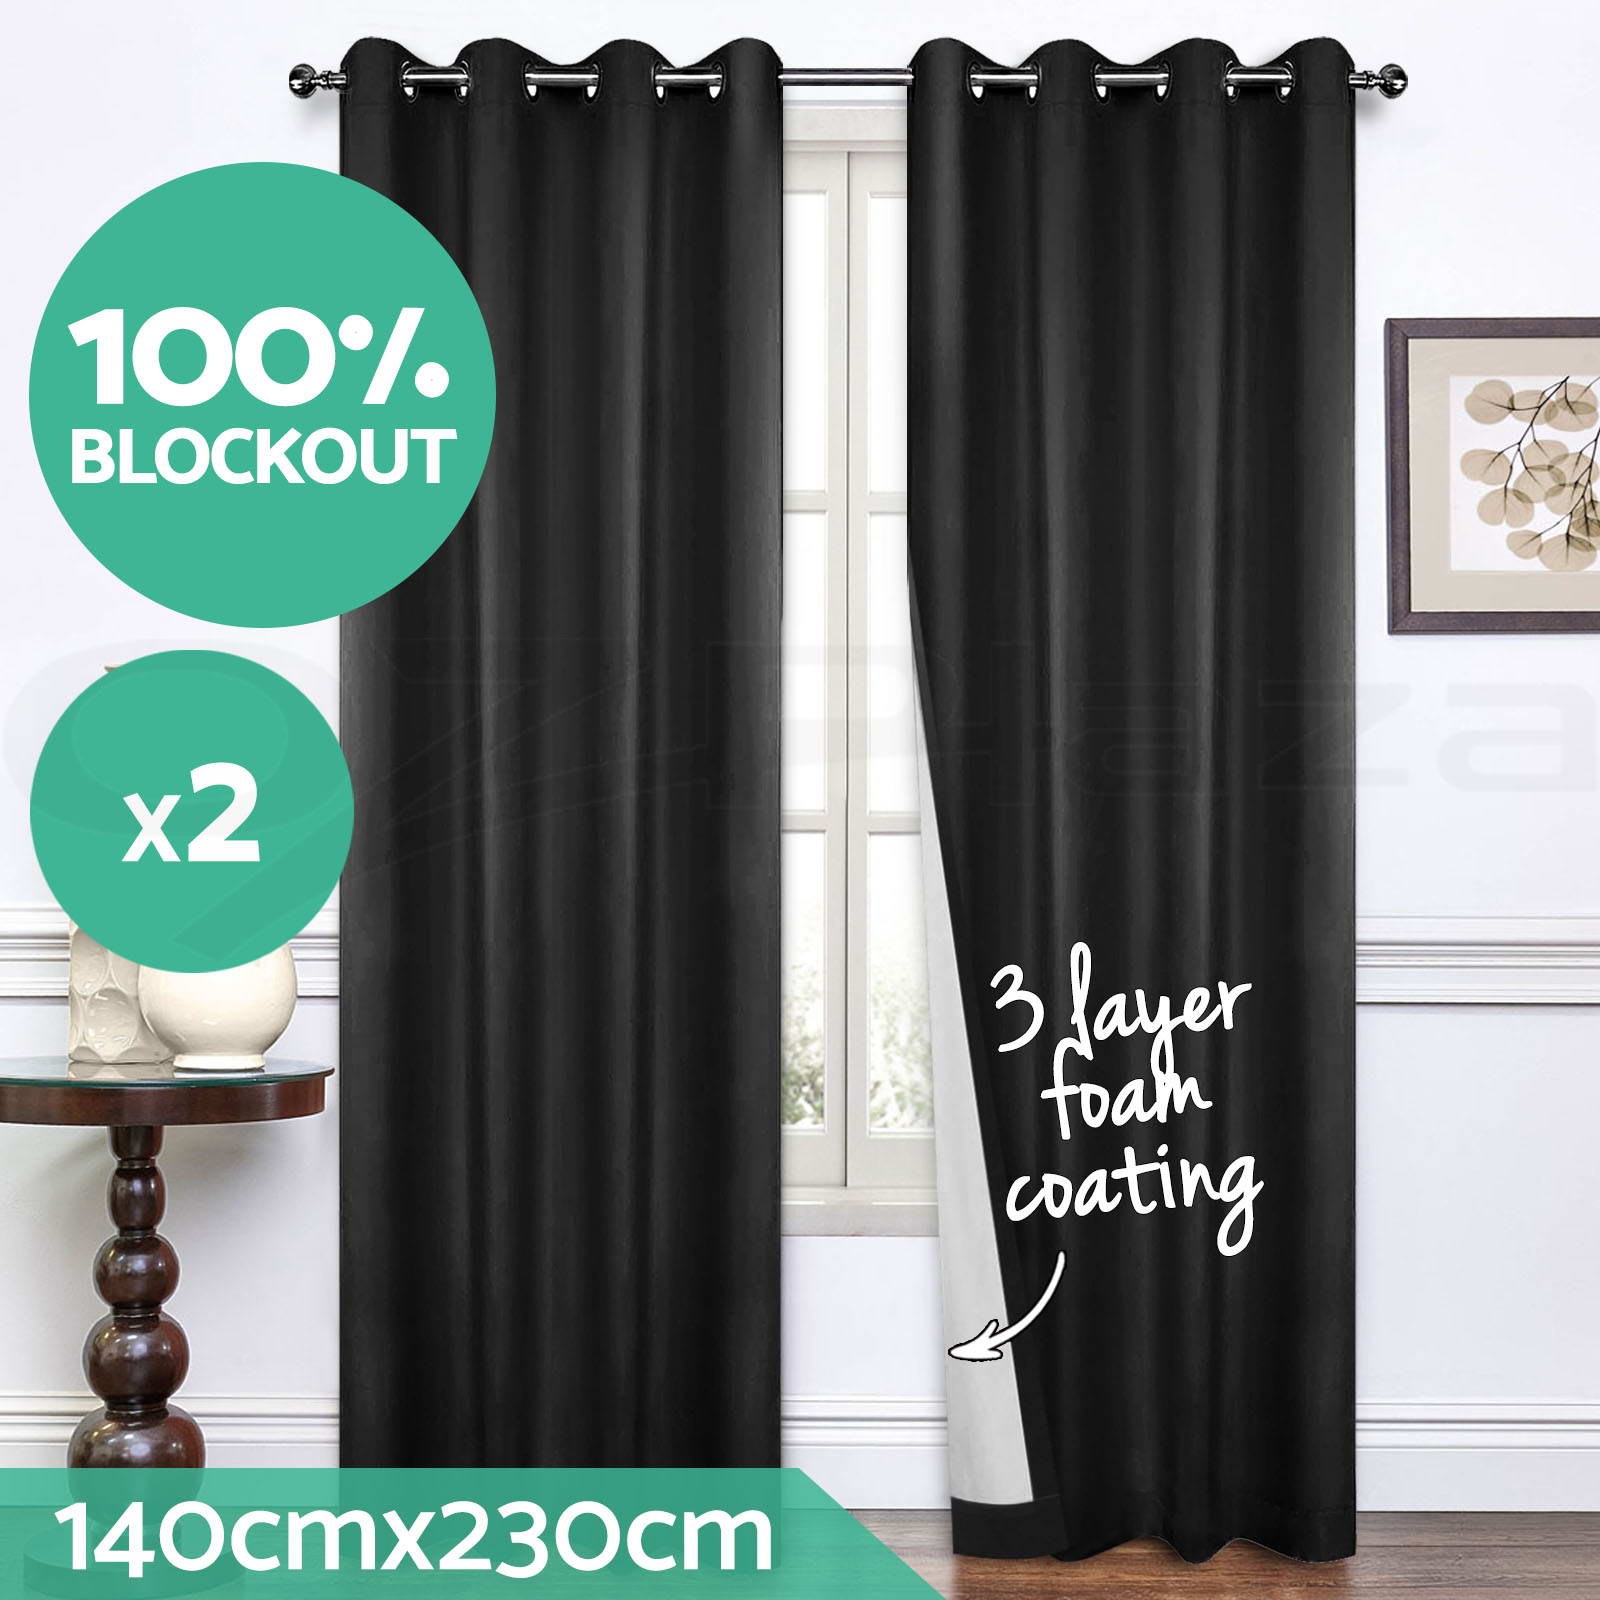 Blockout Curtains 3 Layers Eyelet Pure Fabric 100% Blackout Room